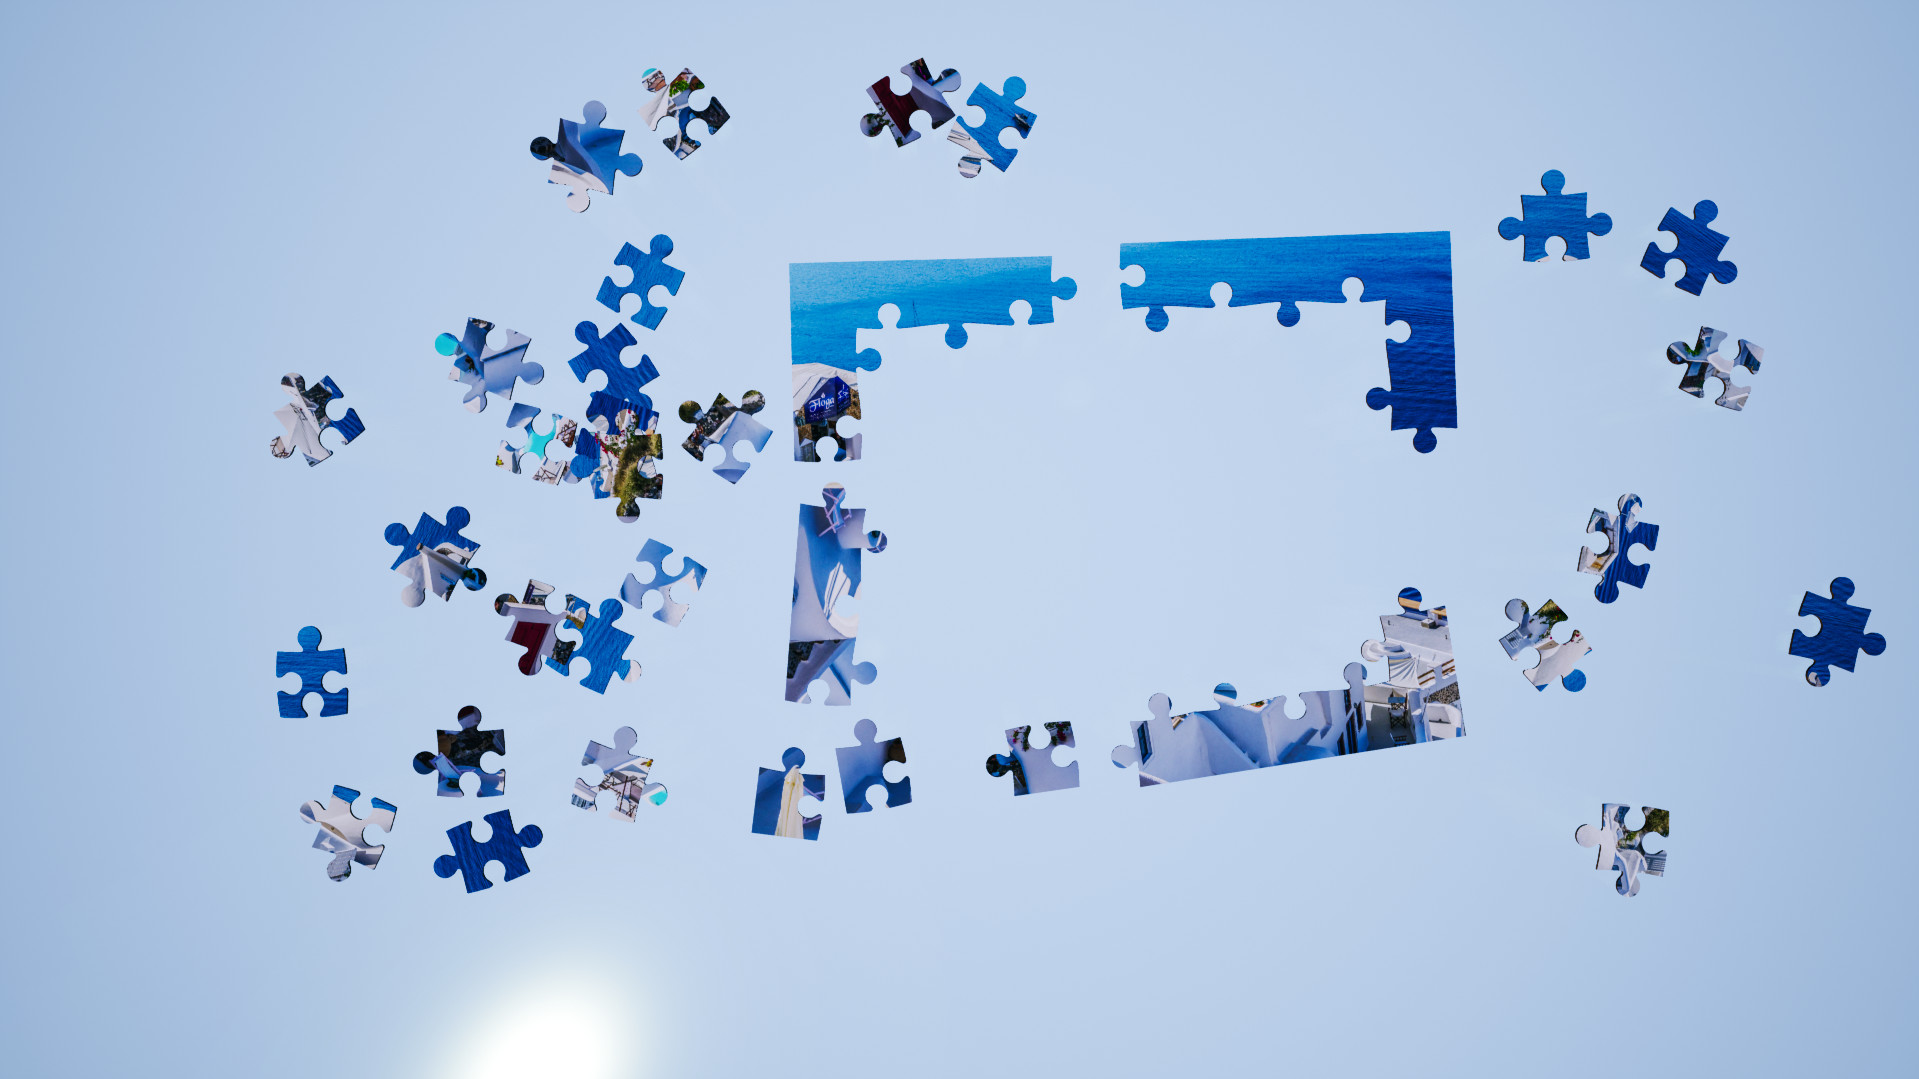 Untitled Puzzle Simulator Free Download